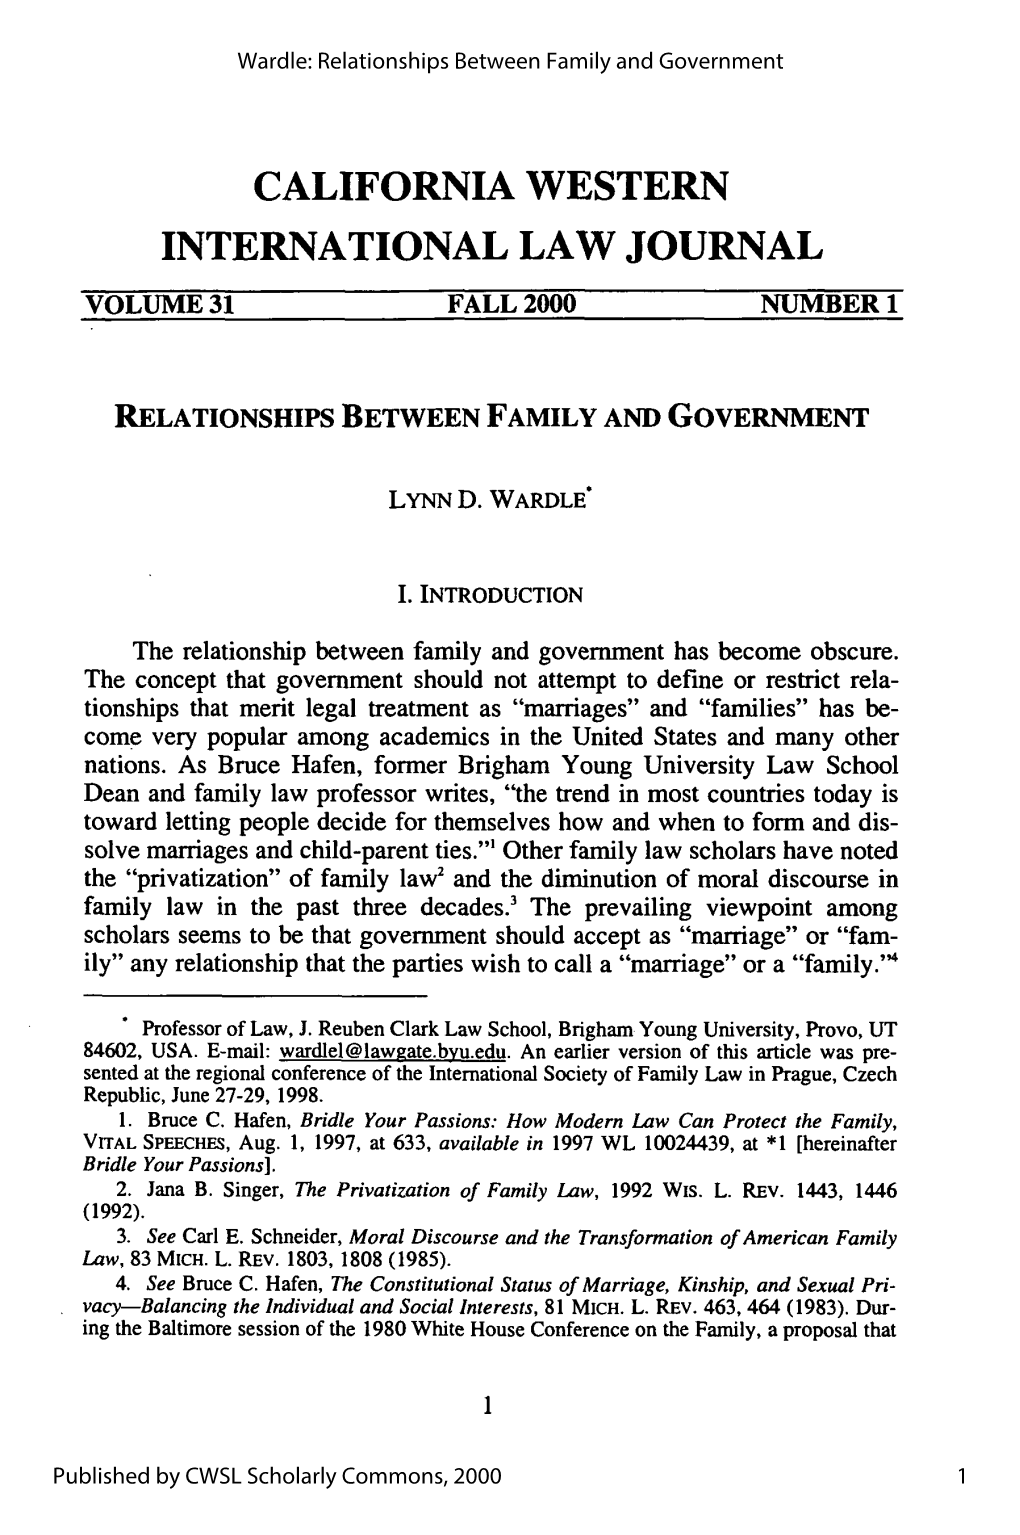 Relationships Between Family and Government